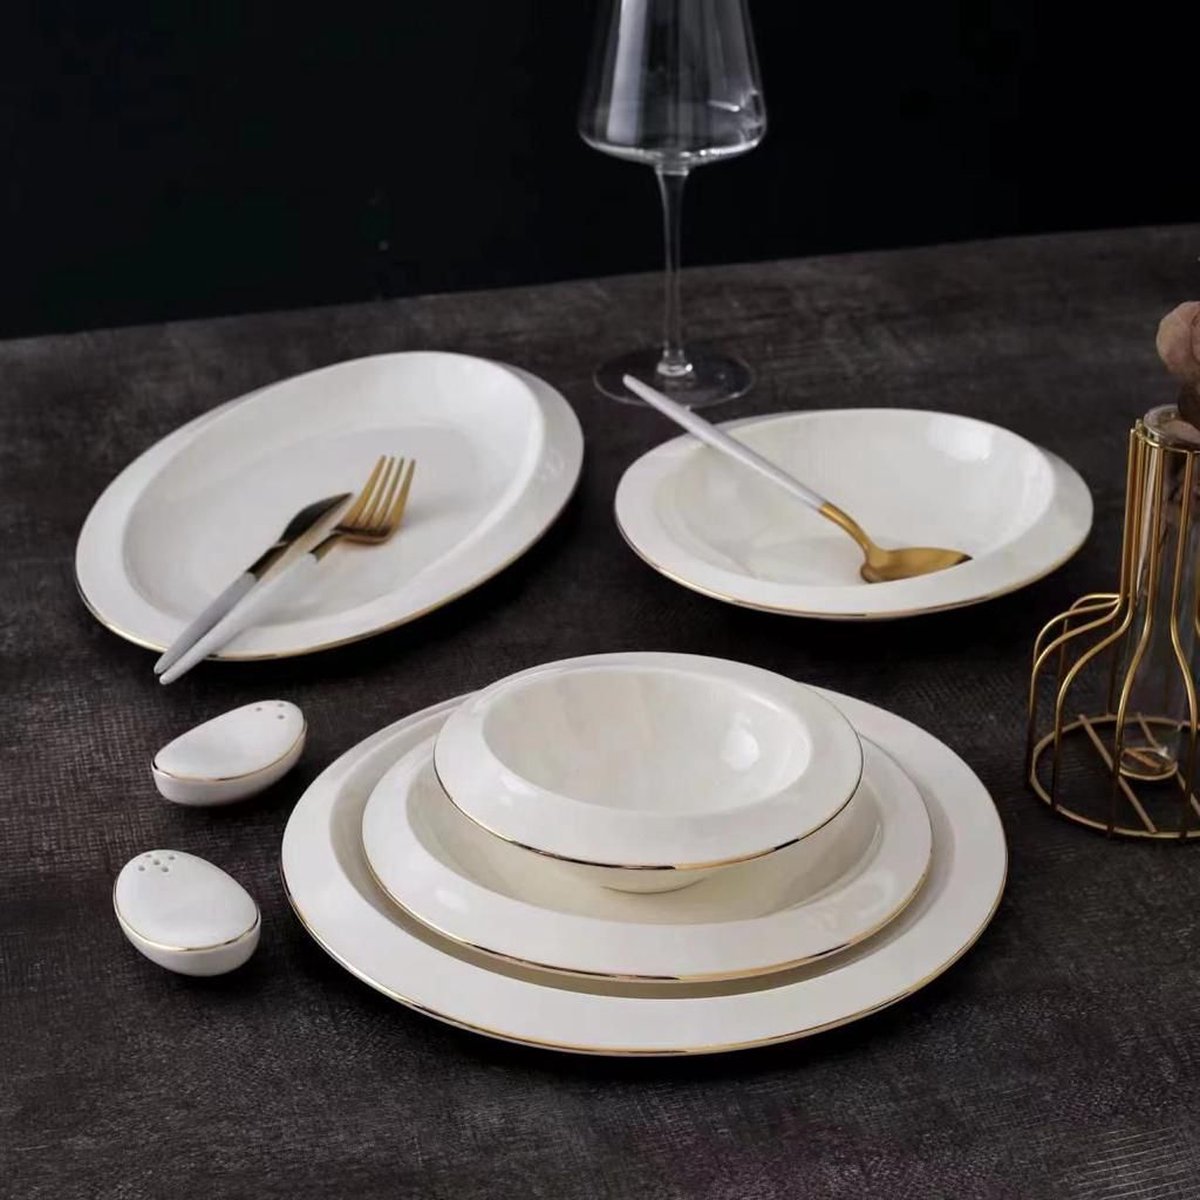 Royalty Line® DS27WS Serviesset - 27 Delig - 6 Persoons - Porselein Servies Set - Goud / Wit